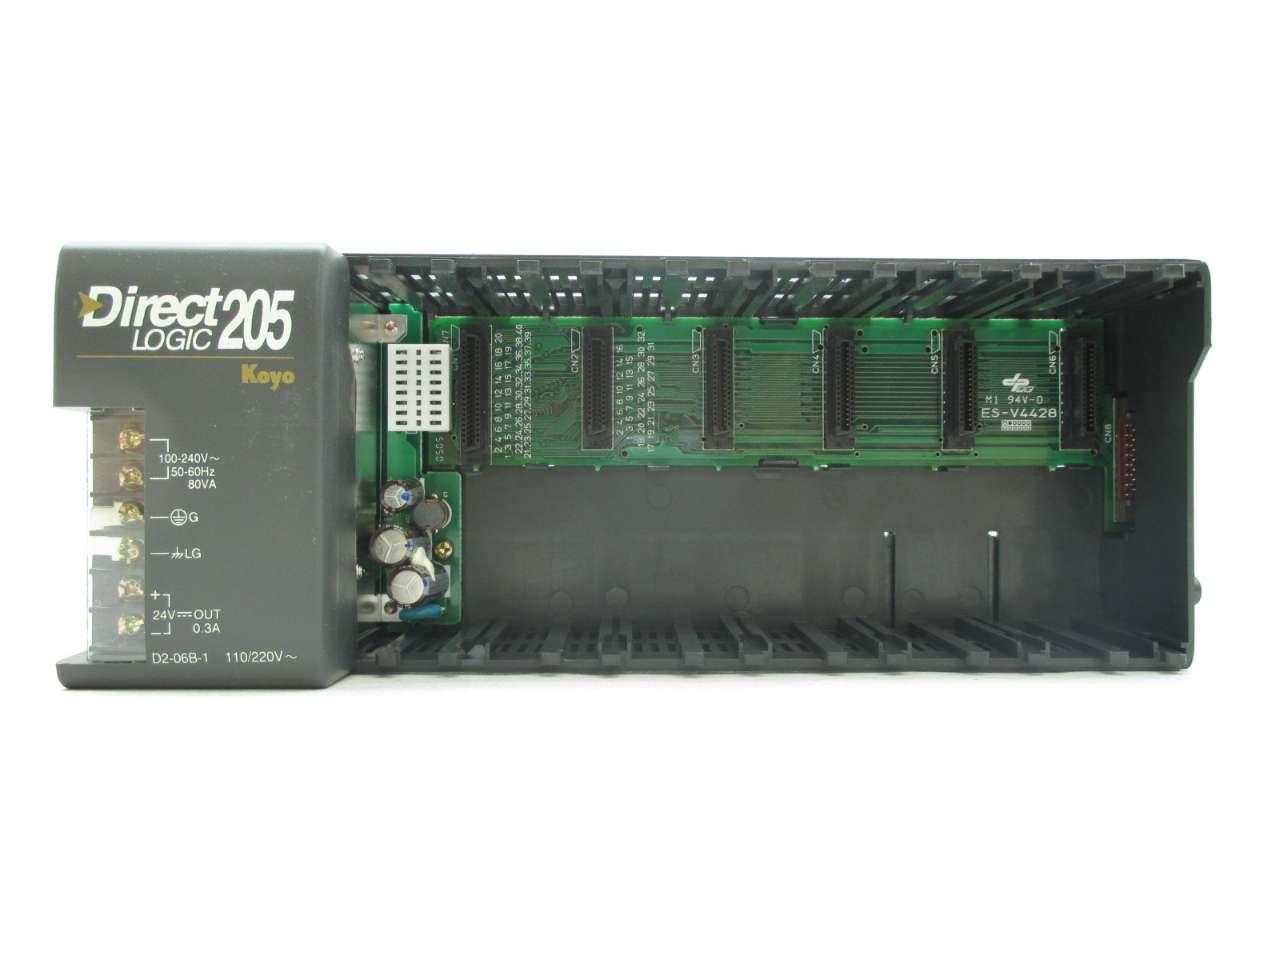 Automation Direct Logic 205 Koyo D2-06b-1 Rack Chassis D206B1 for sale online 